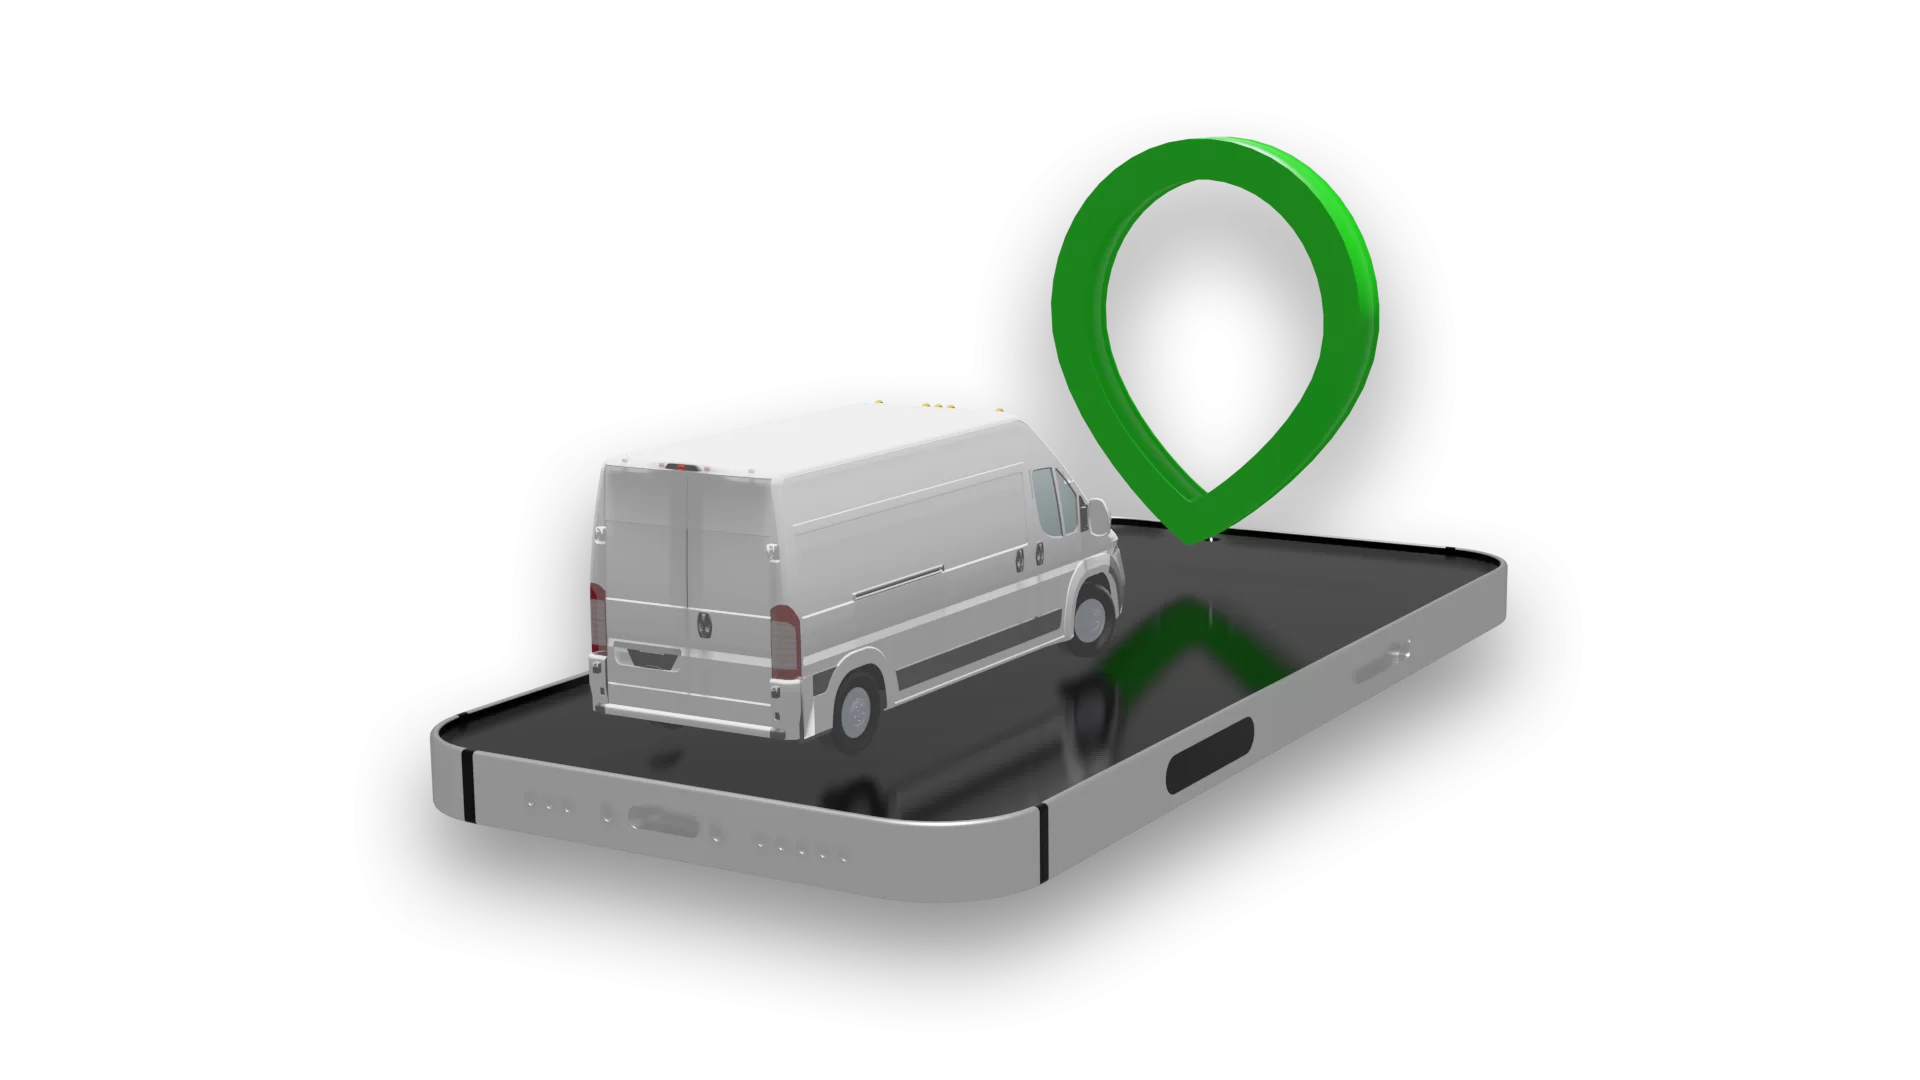 3d van and mobile phone with geo2 logo